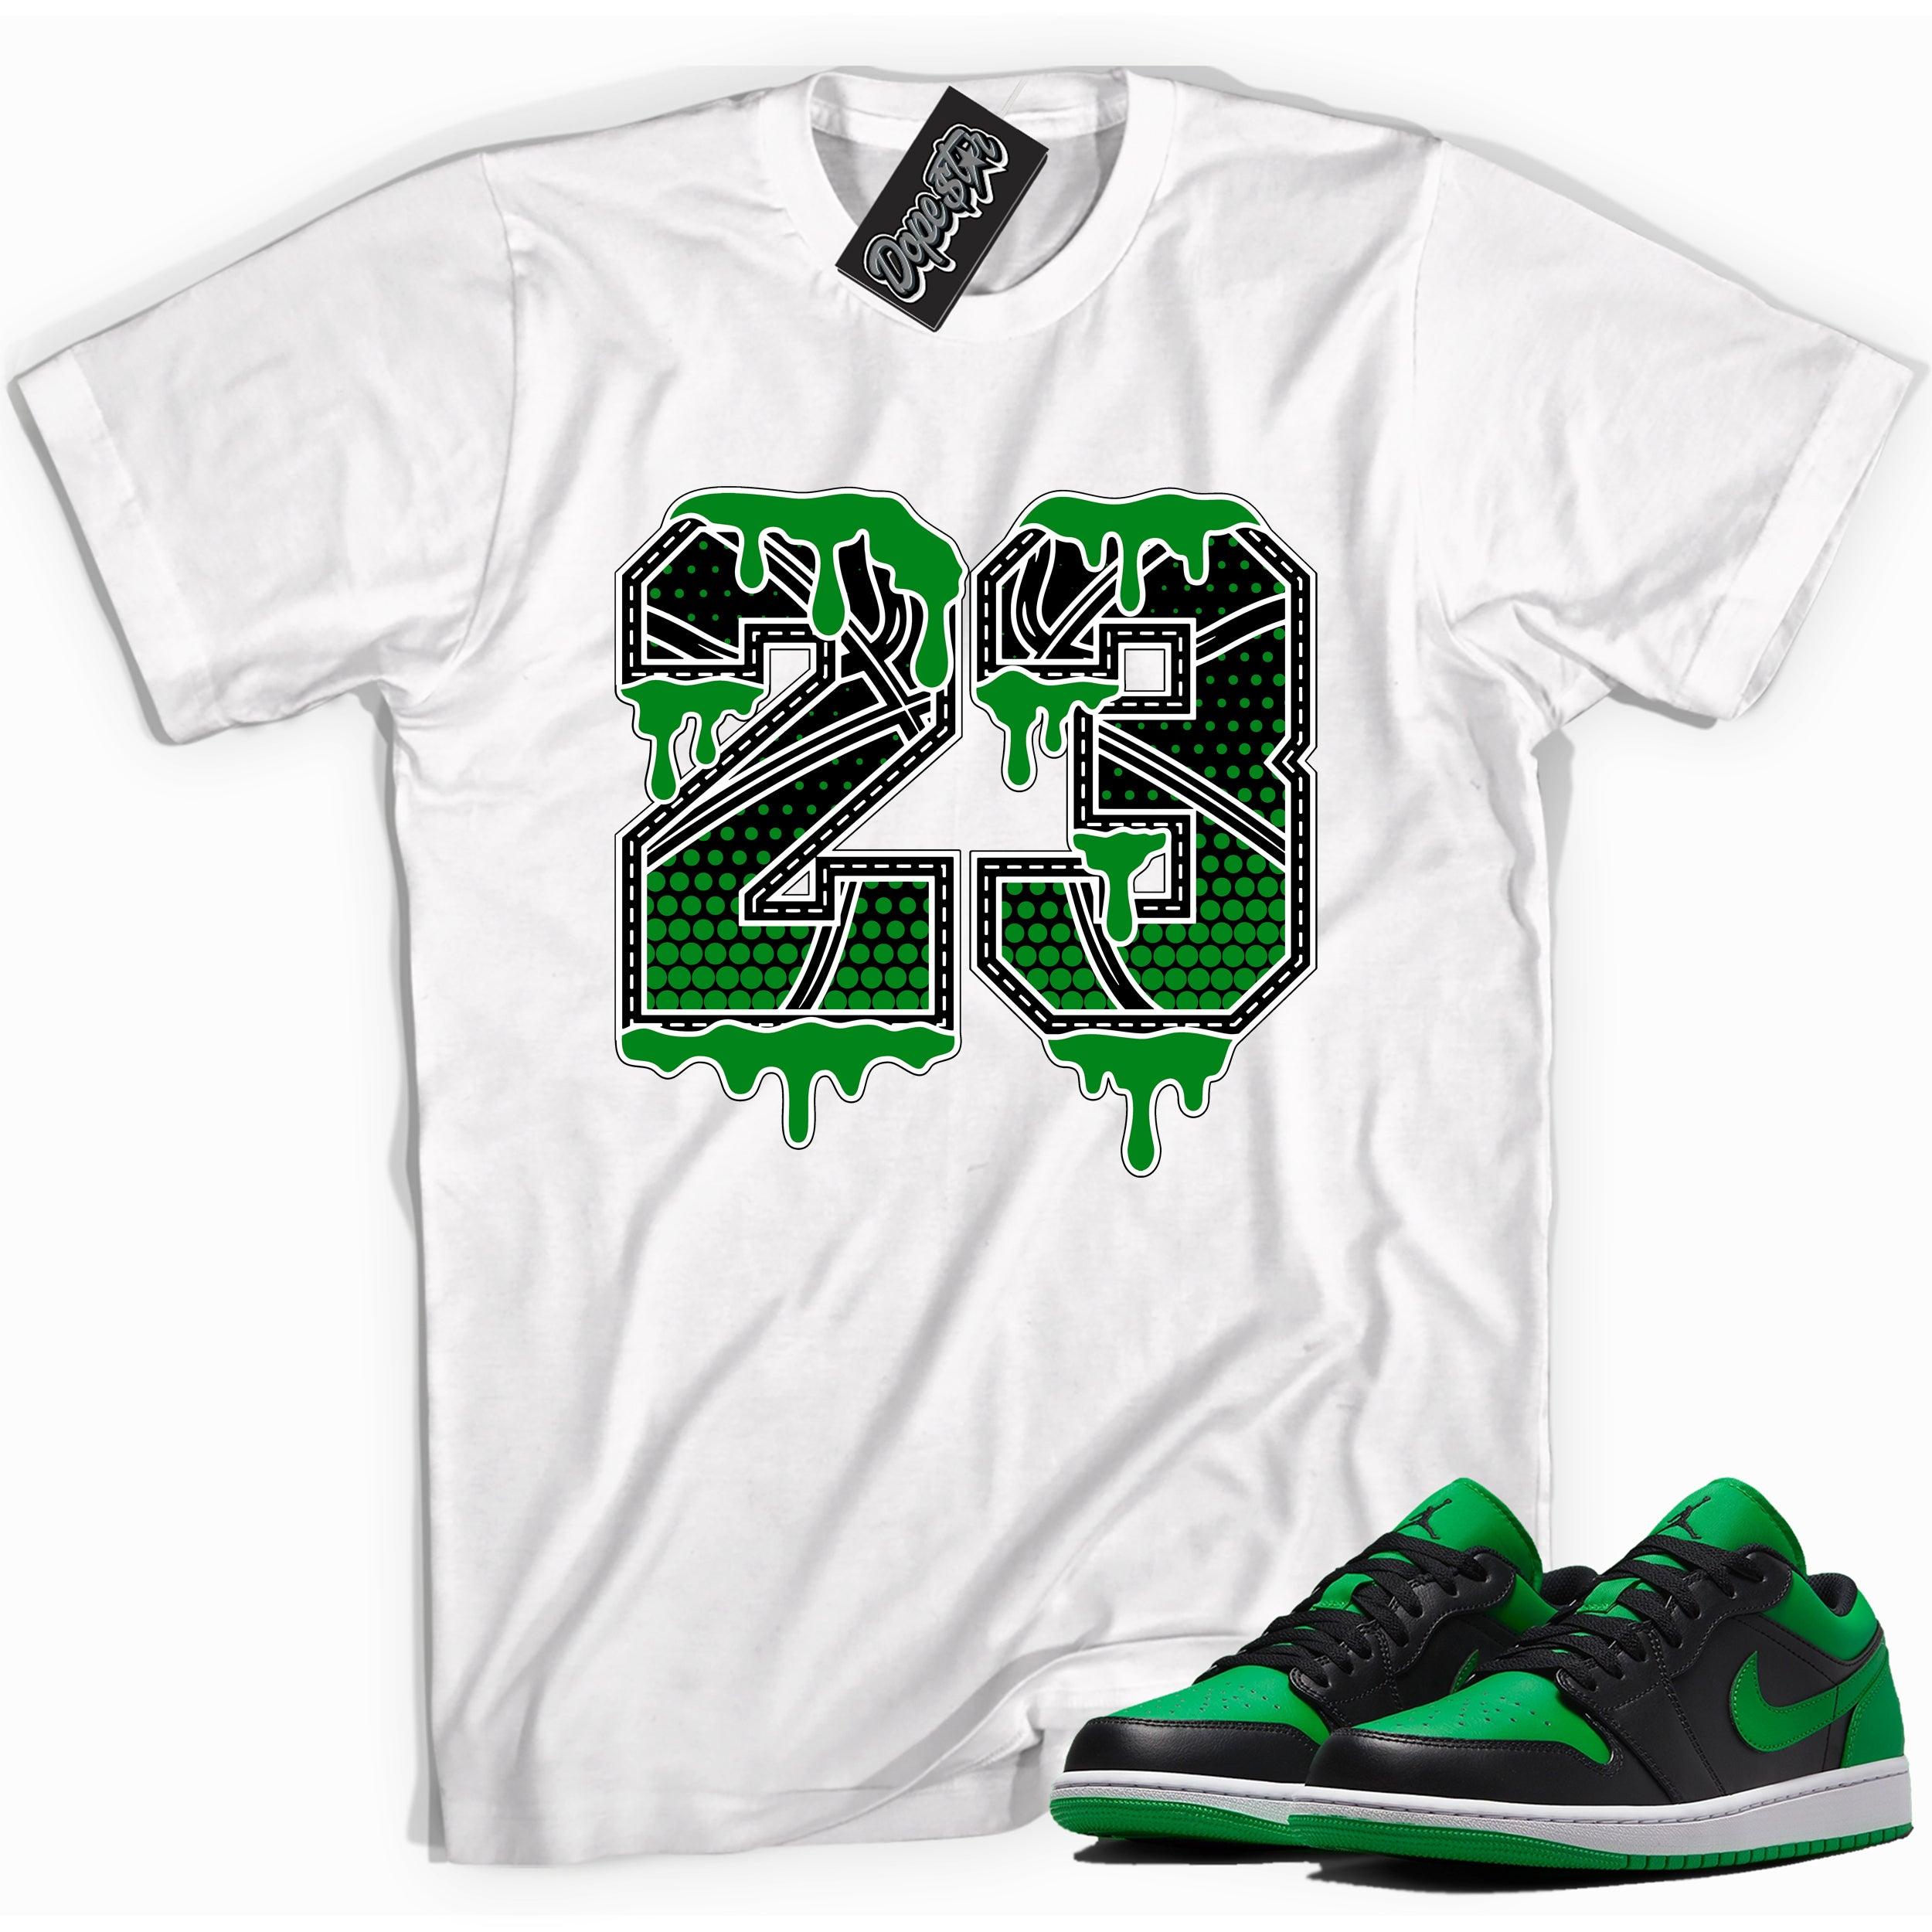 Cool white graphic tee with '23 BasketBall' print, that perfectly matches Air Jordan 1 Low Lucky Green sneakers